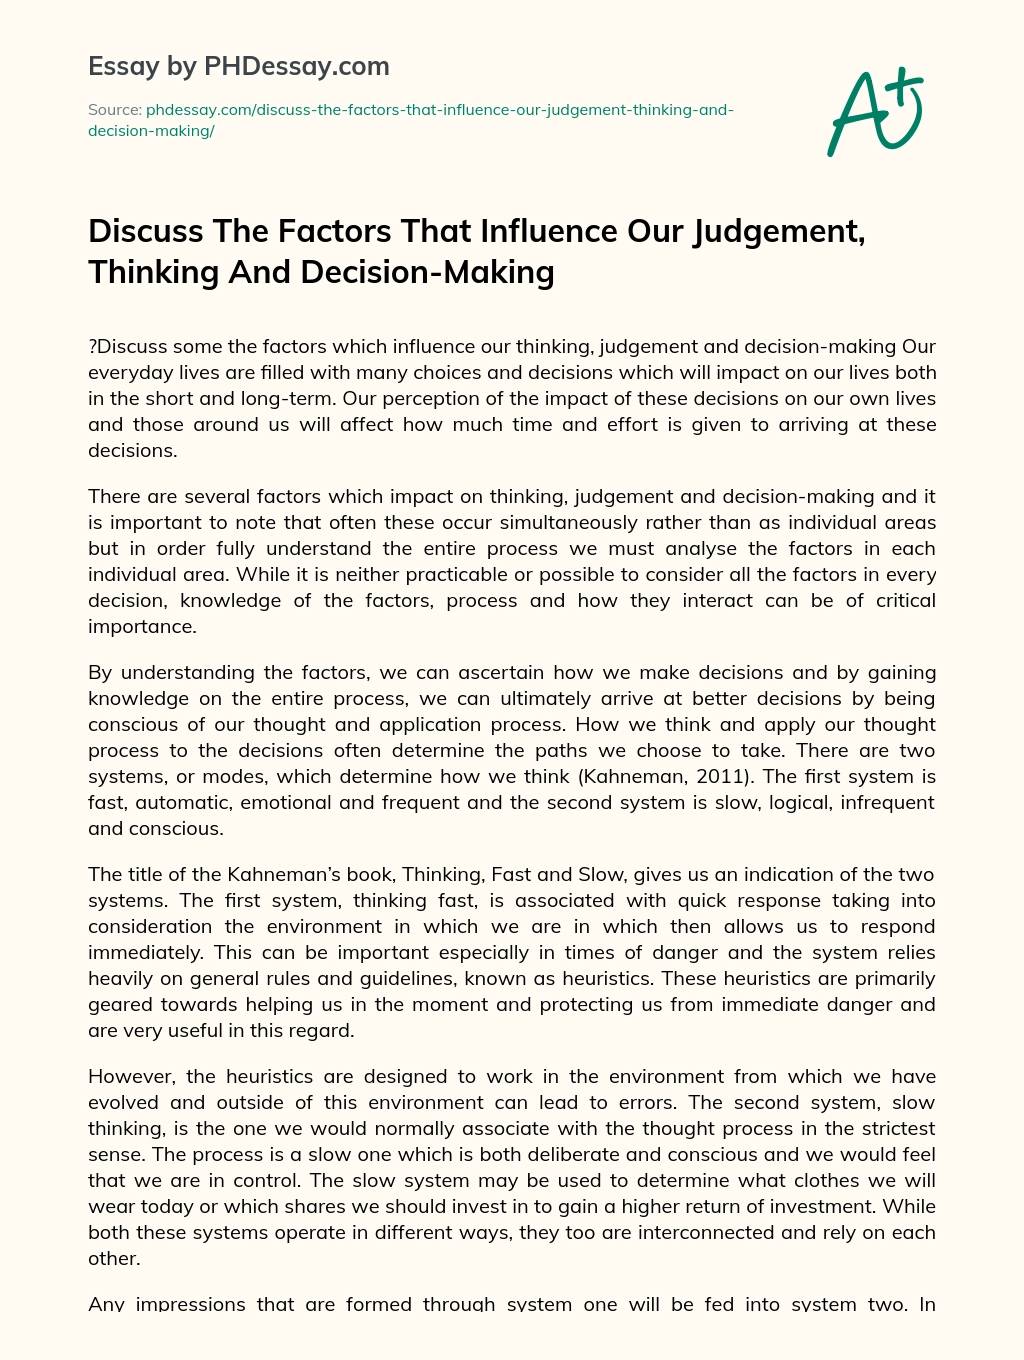 Discuss The Factors That Influence Our Judgement, Thinking And Decision-Making essay